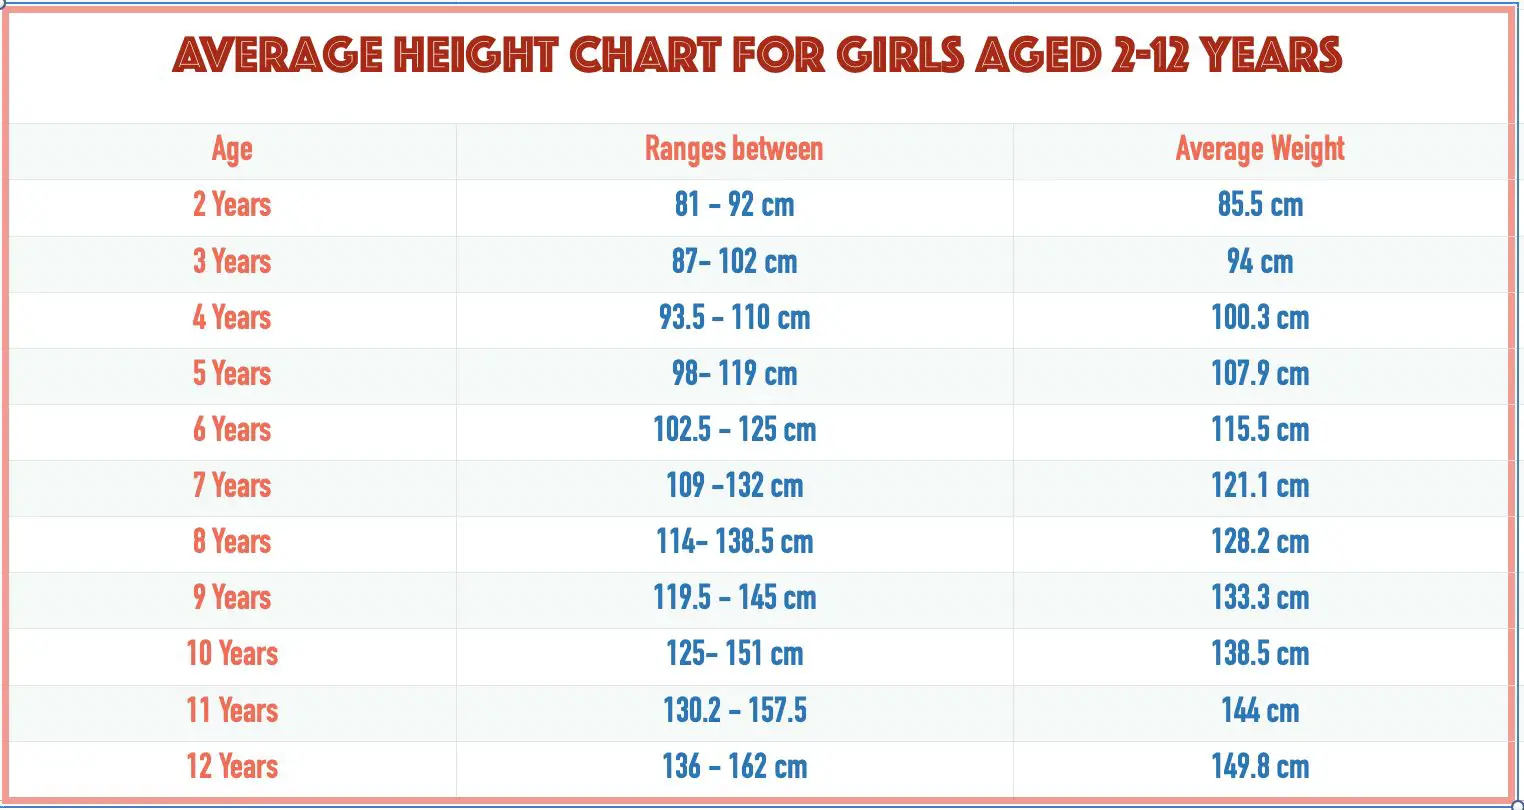 9 Year Old Average Weight